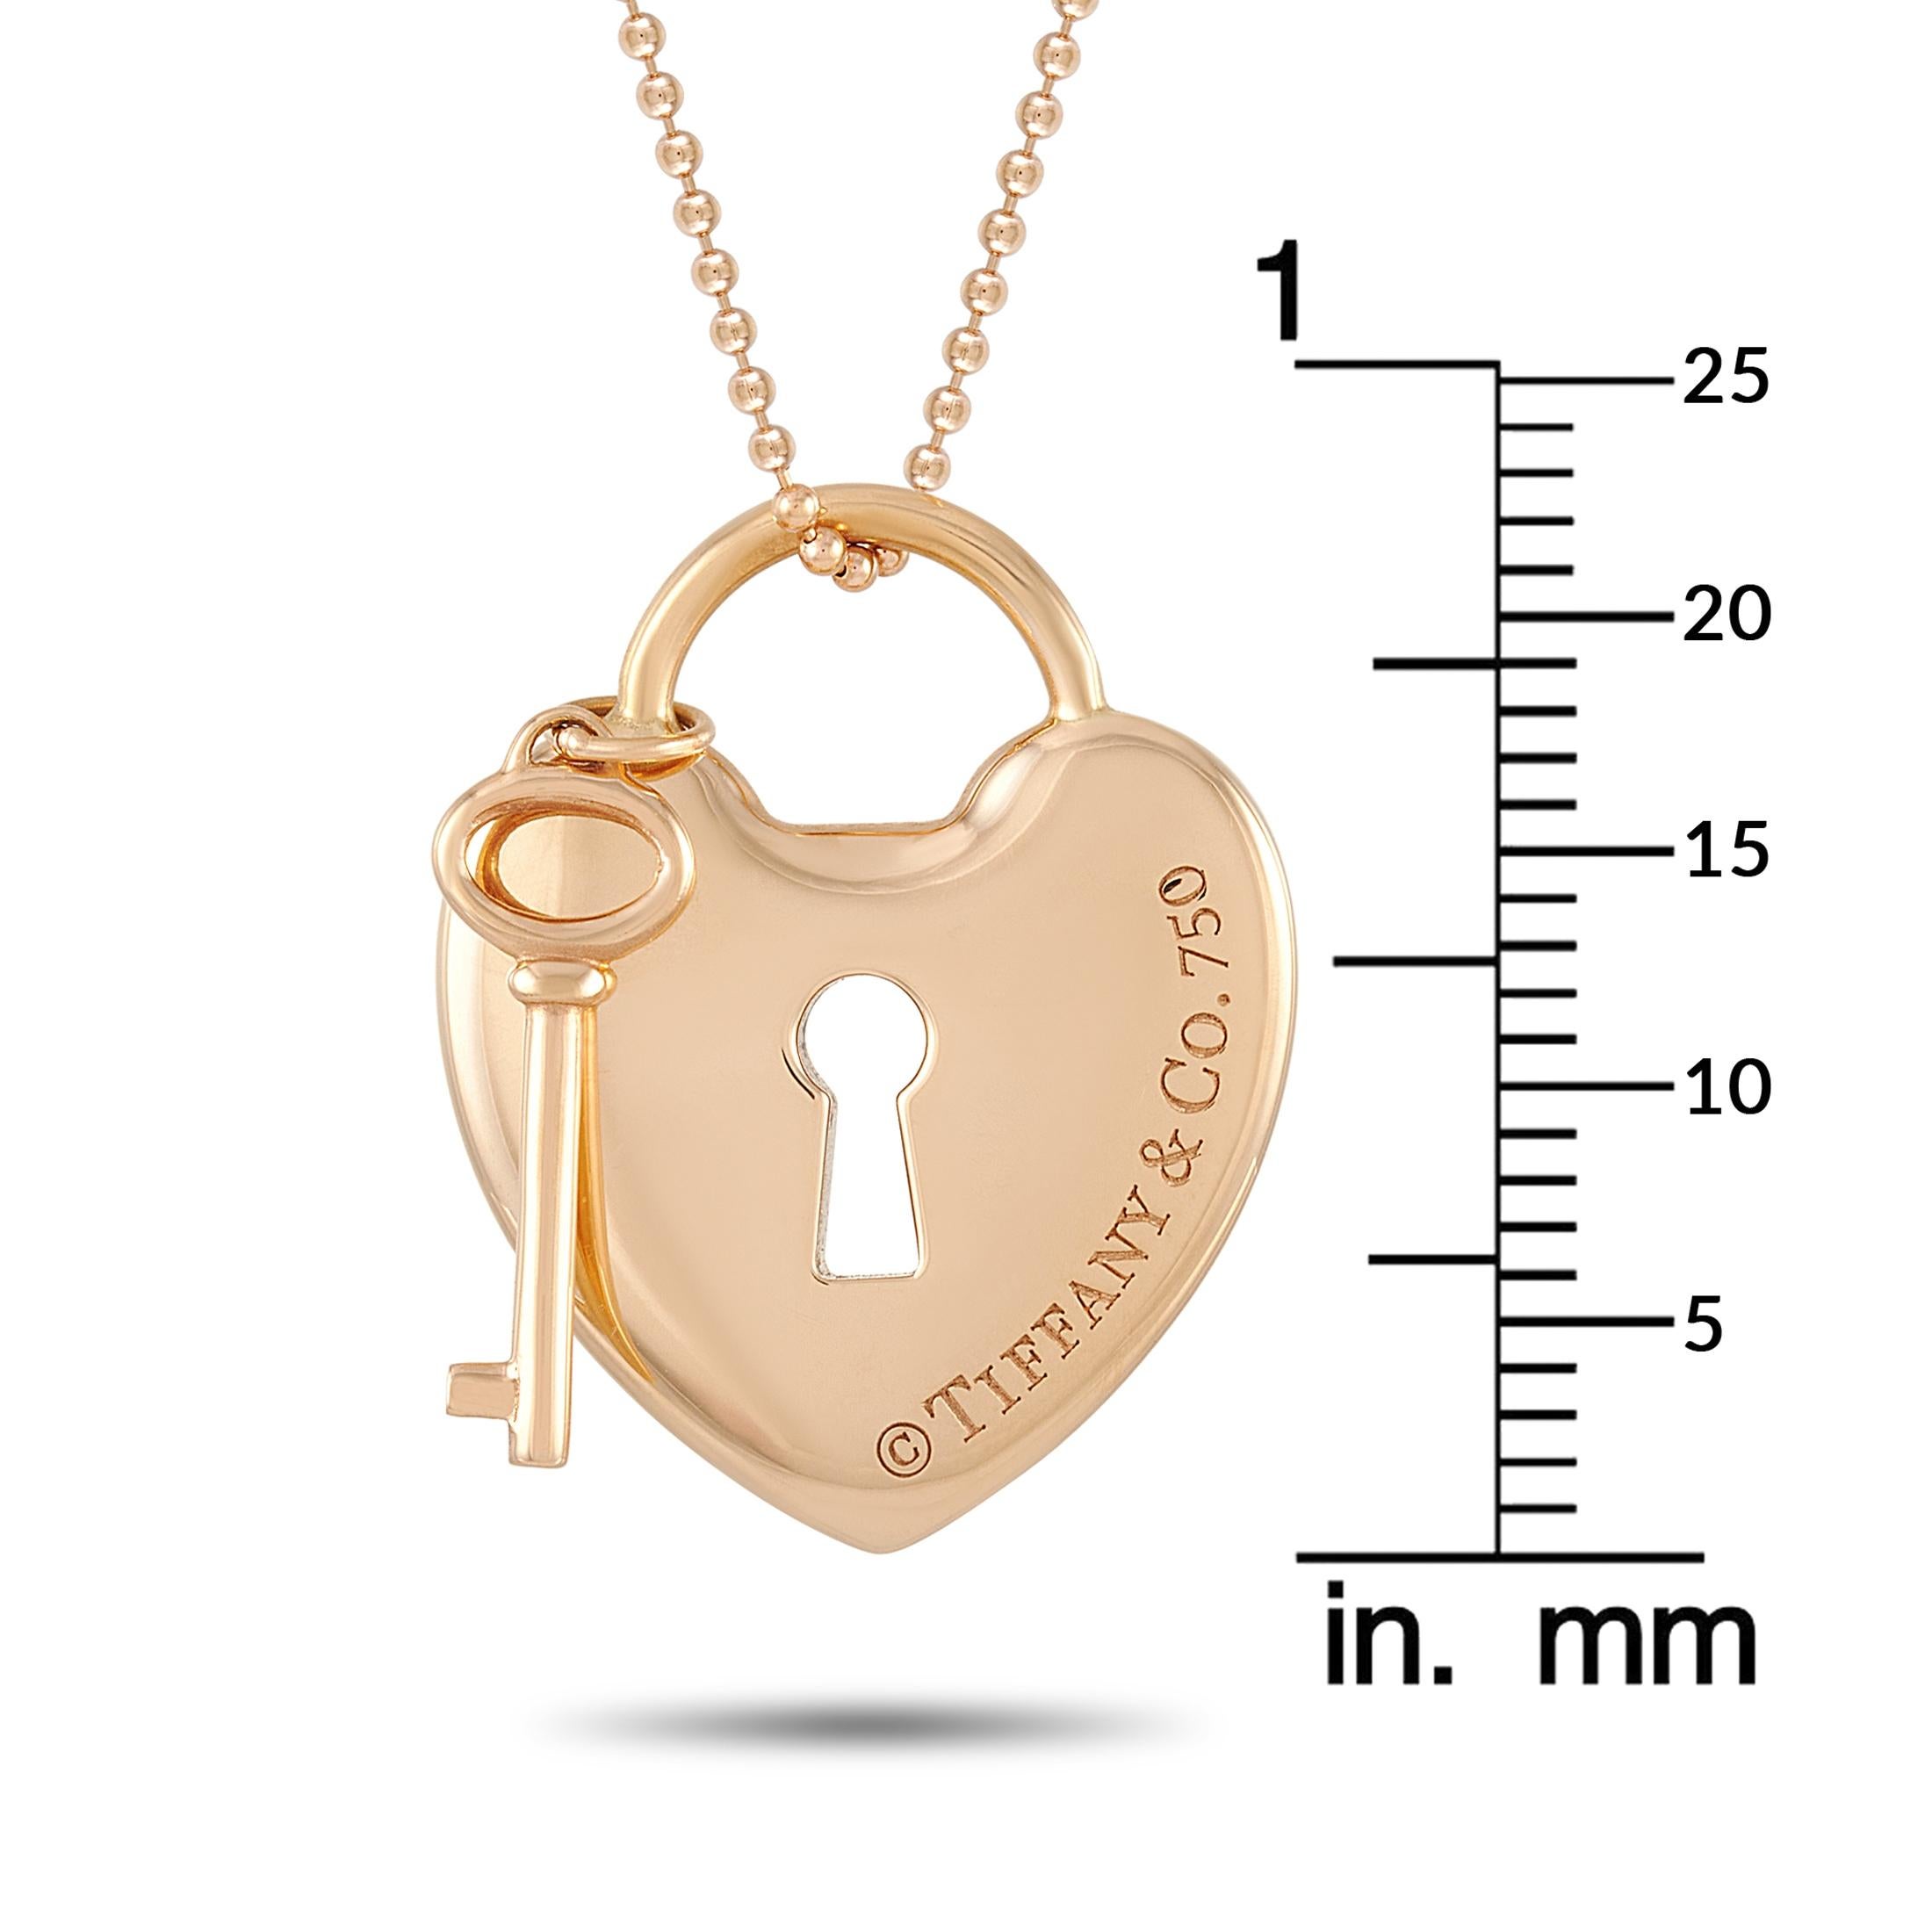 Women's Tiffany & Co. 18K Rose Gold Lock and Key Heart Pendant Necklace